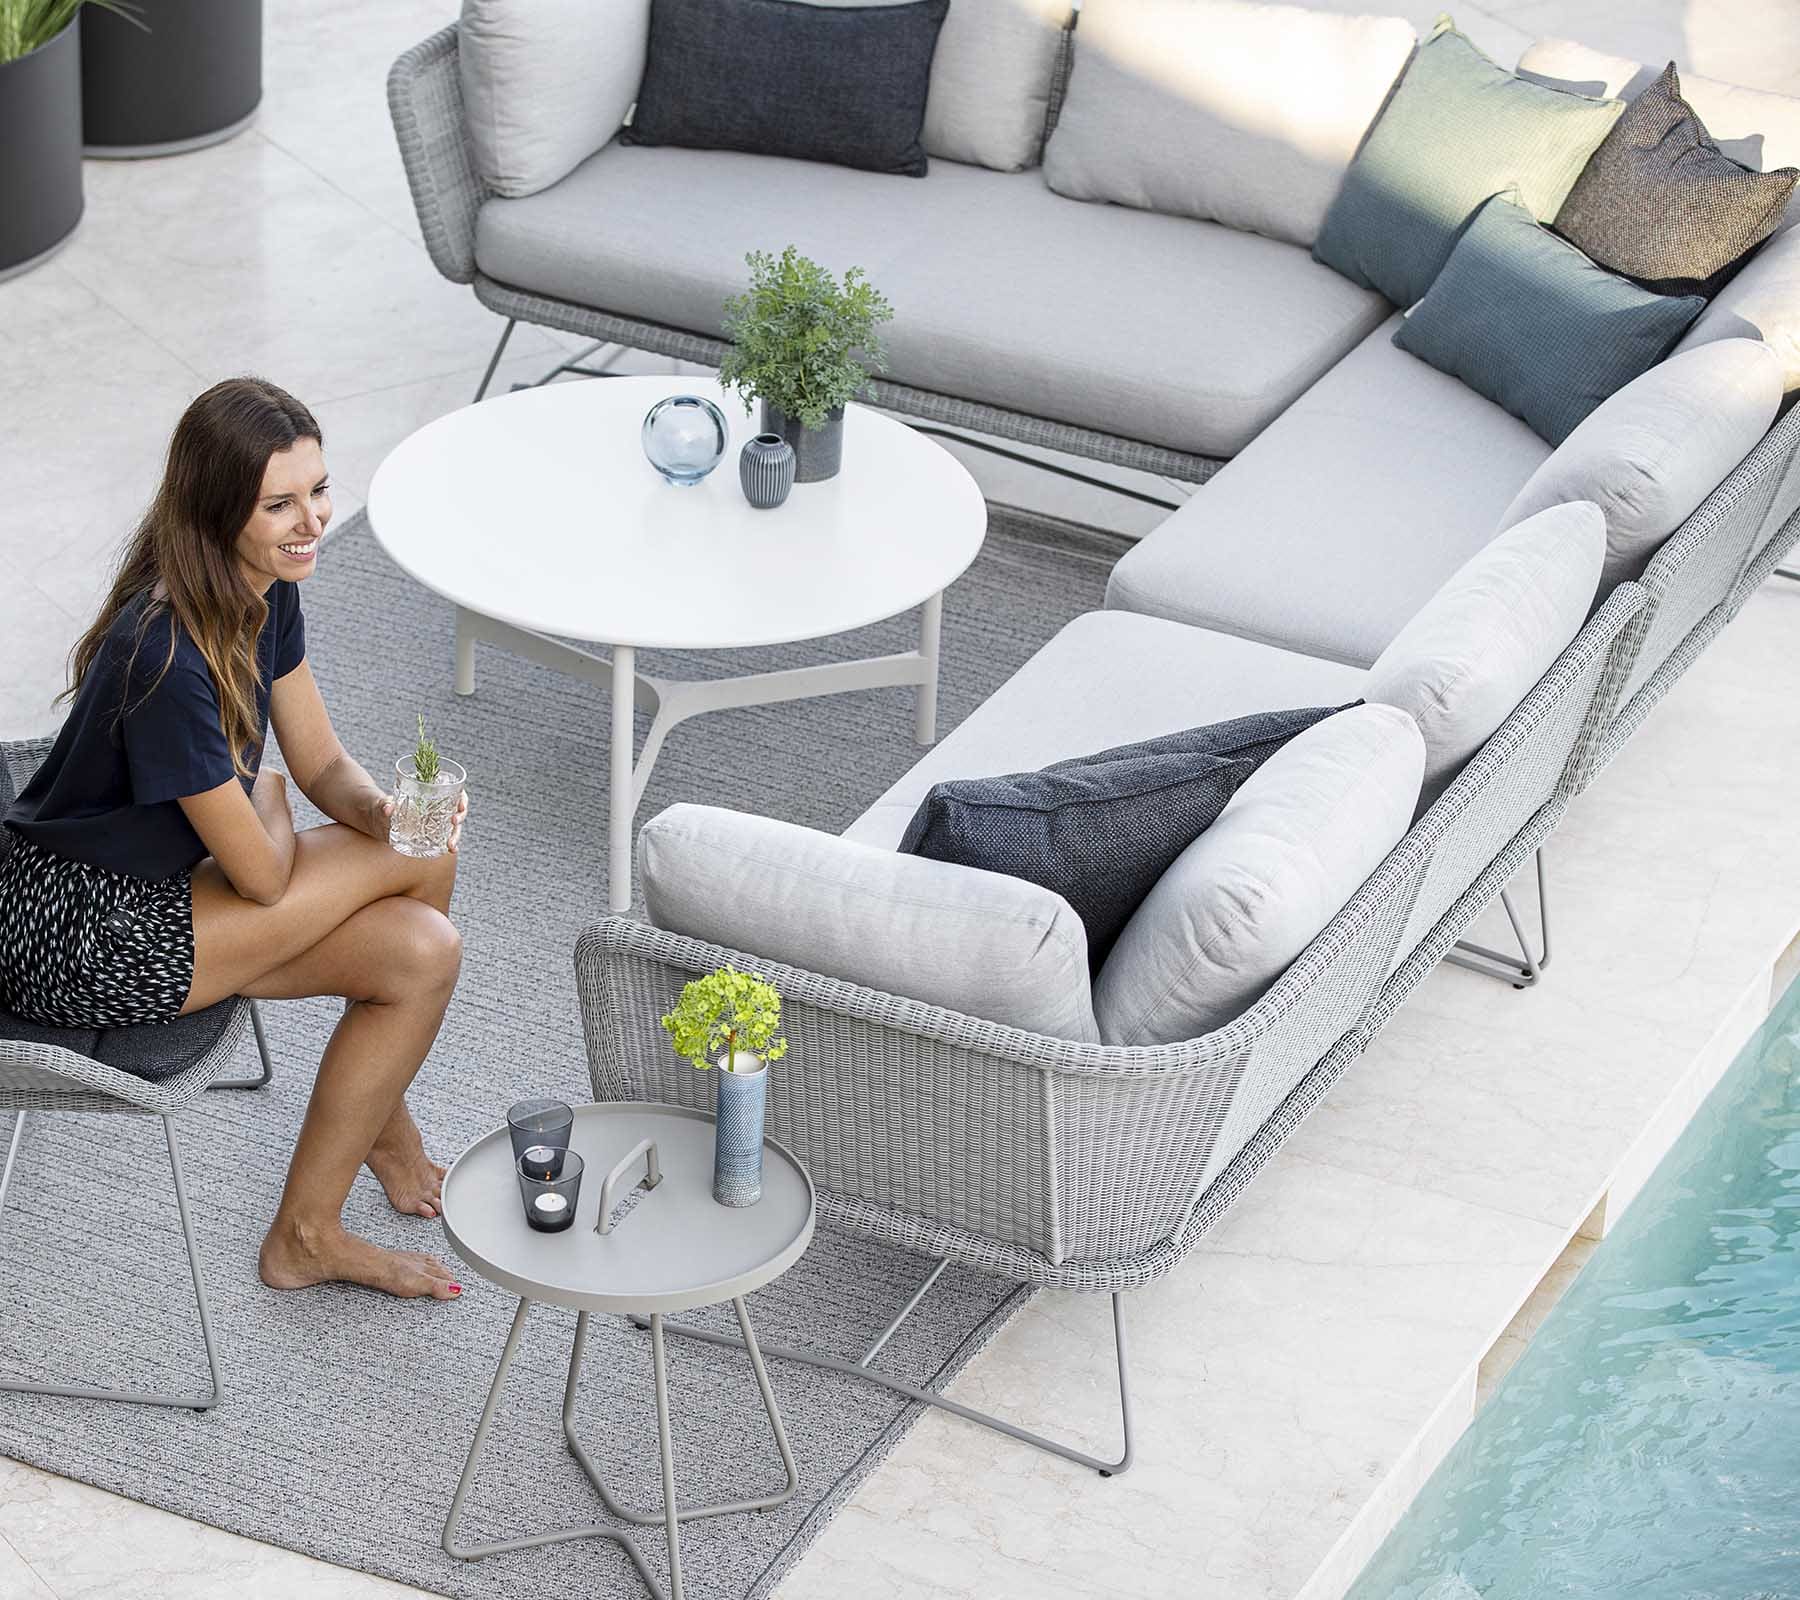 Boxhill's Horizon 2-Seater Outdoor Left Module Sofa lifestyle image together with Horizon 2-Seater Outdoor Right Module Sofa at patio with a white round table and a woman sitting down holding a glass of water